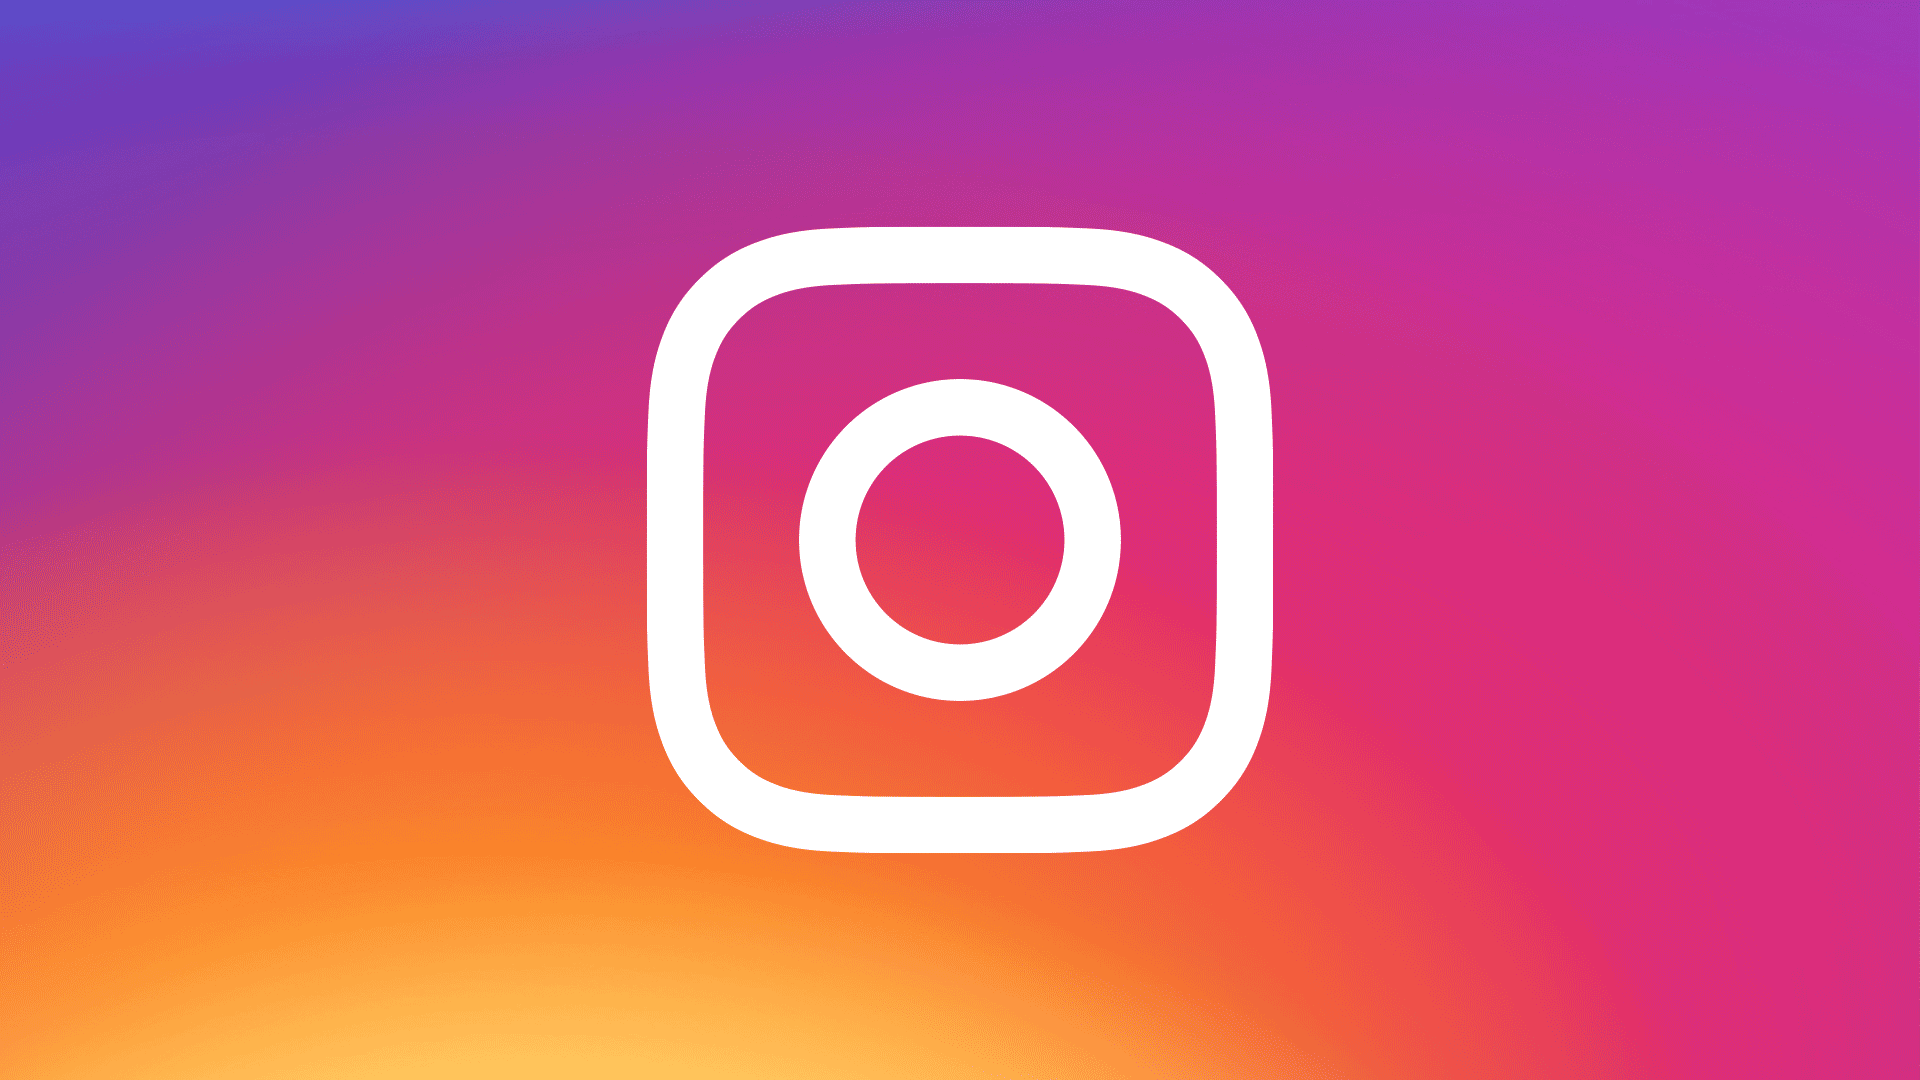 Illustration of the Instagram logo with the light blinking as if it's recording.